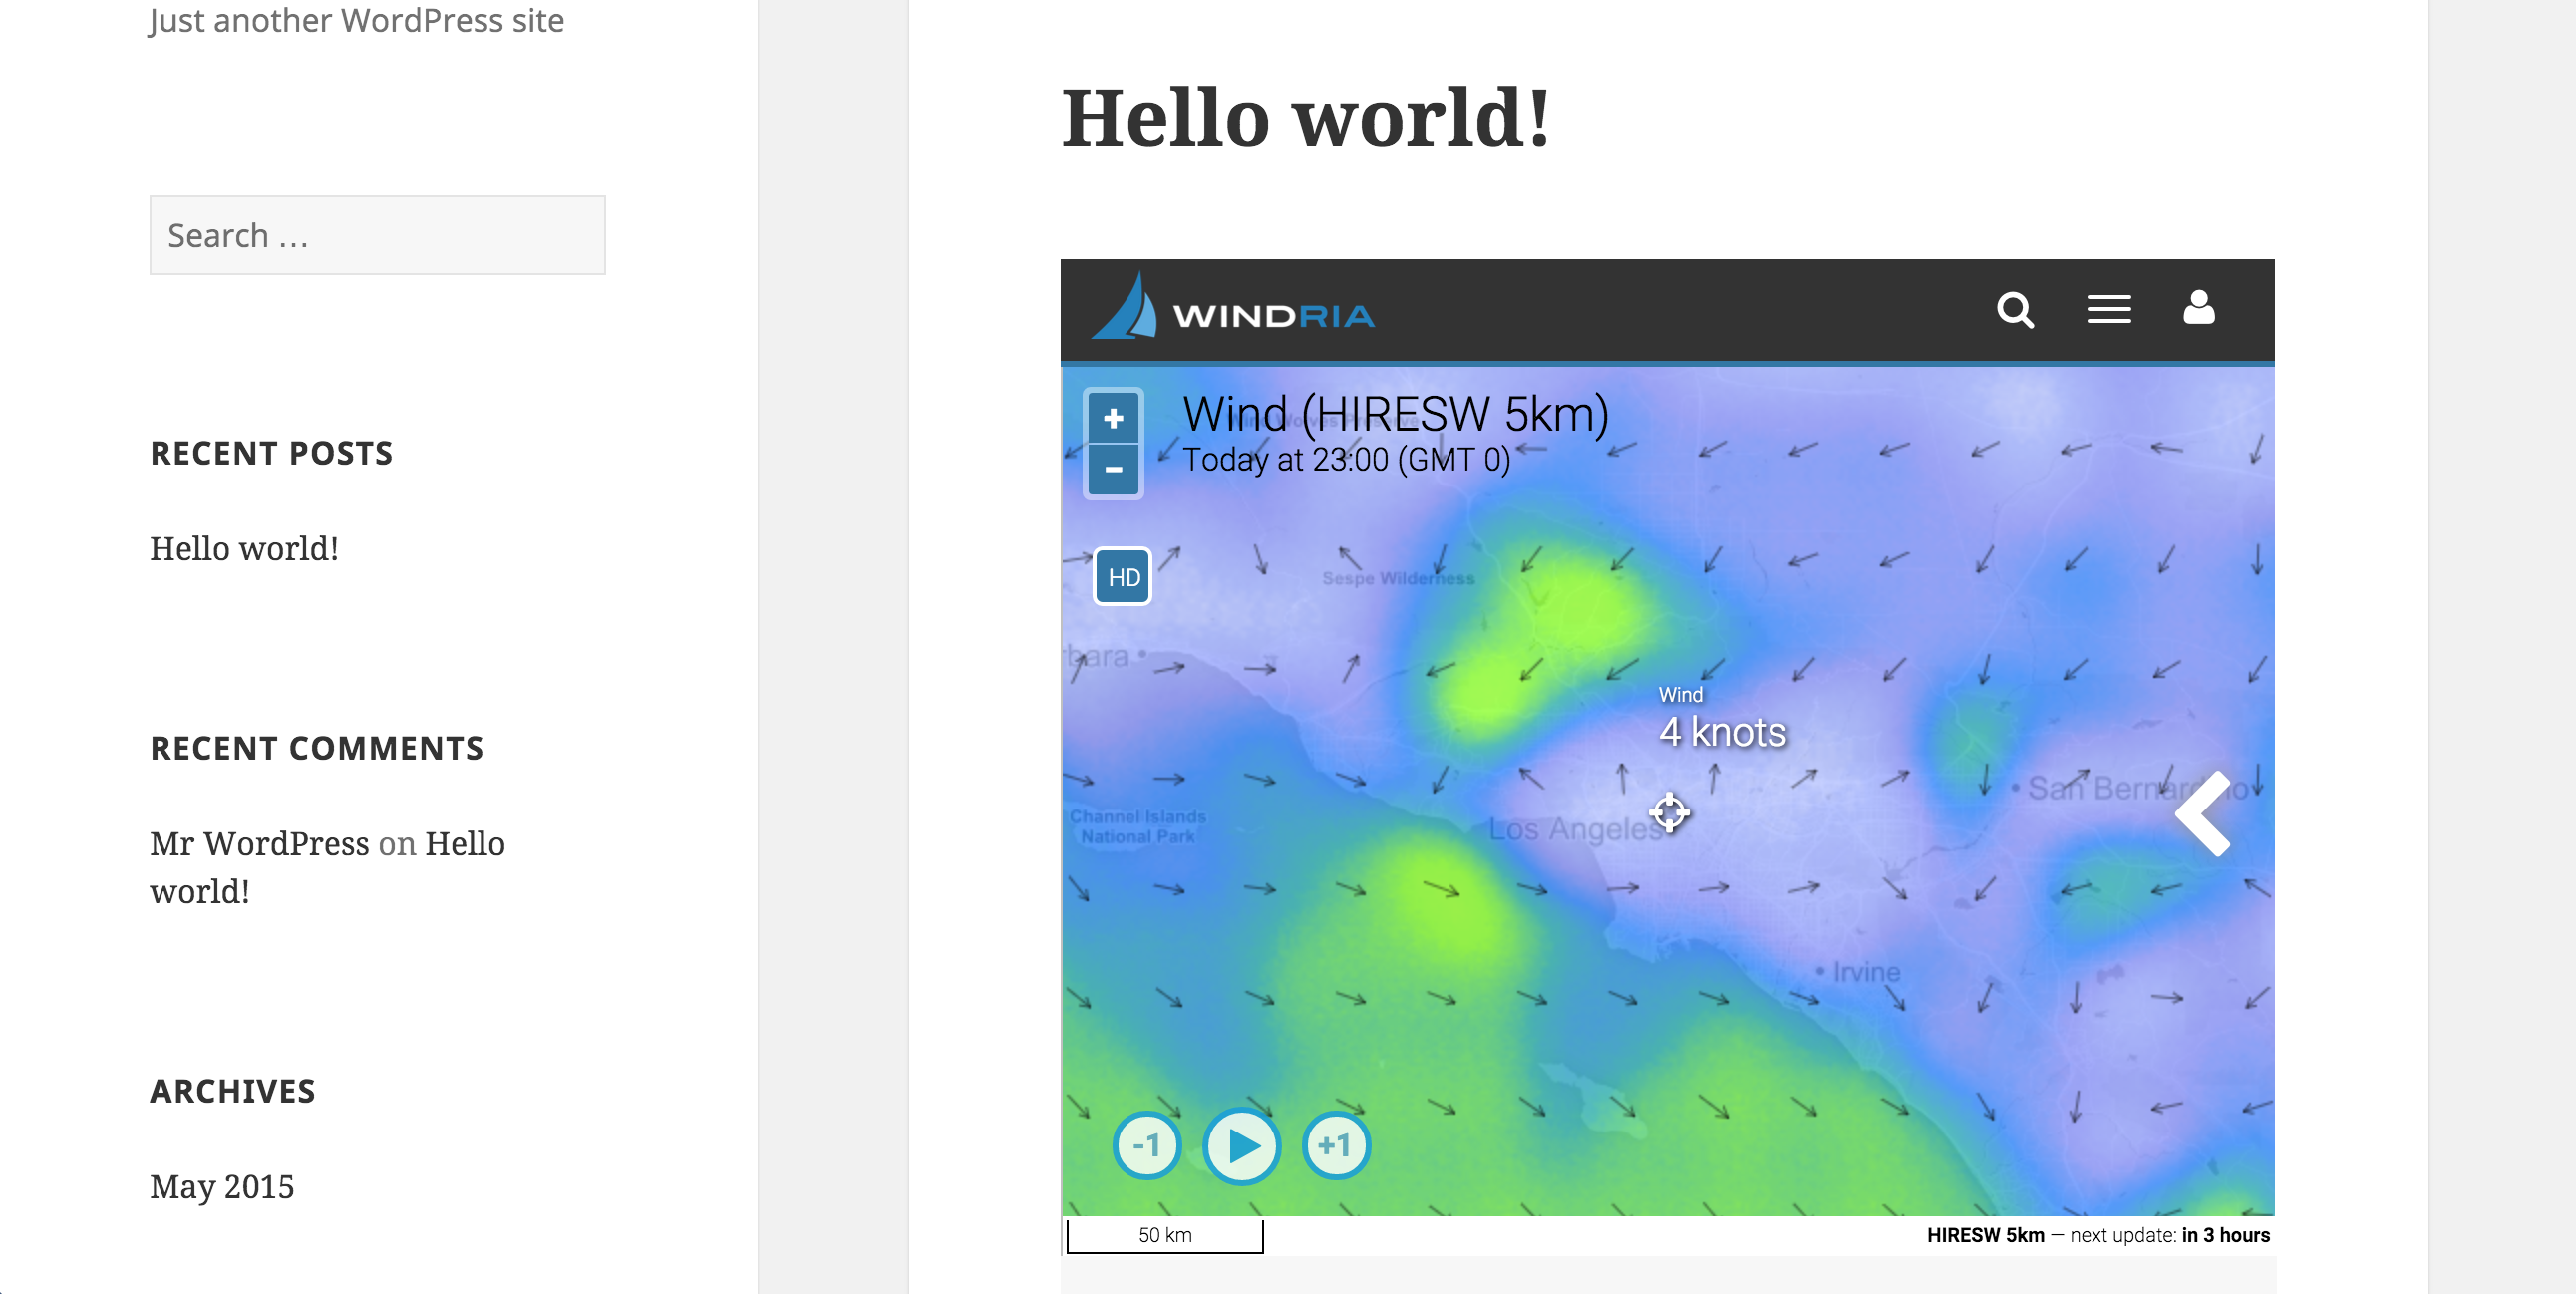 Demo of the Windria map on a WordPress page.